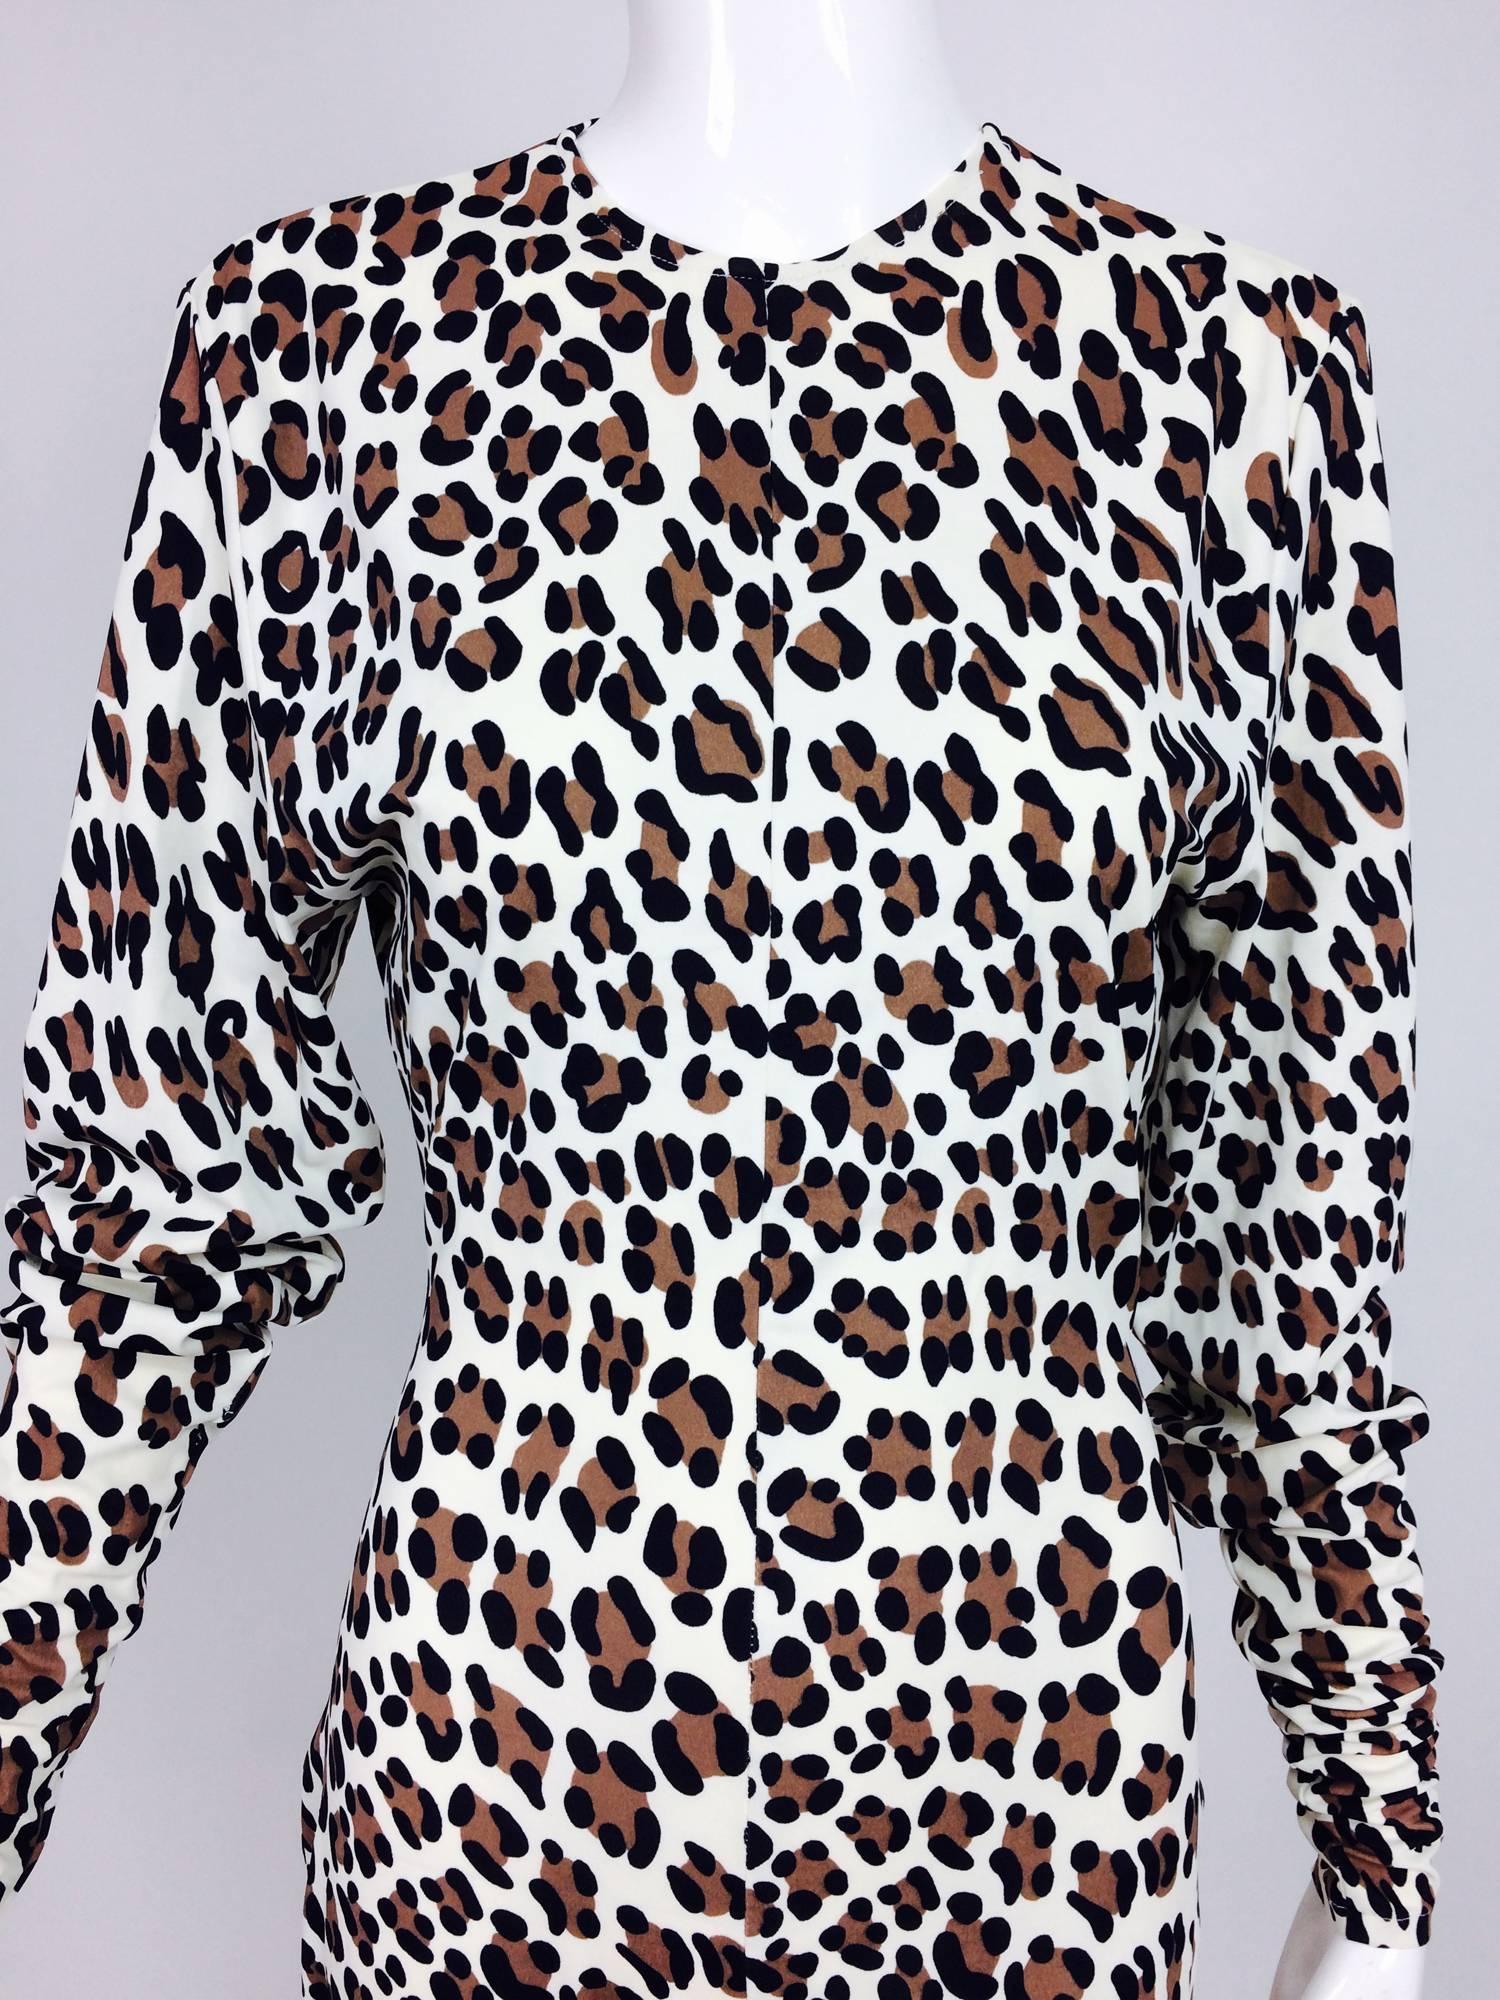 Vintage Norma Kamali leopard print cat suit 1980s. Silky nylon/Lycra has lots of stretch. Long sleeves with a jewel neckline, closes at the back with a hook and eye there is a deep vent below. Fitted below the bust through the hip and legs. The